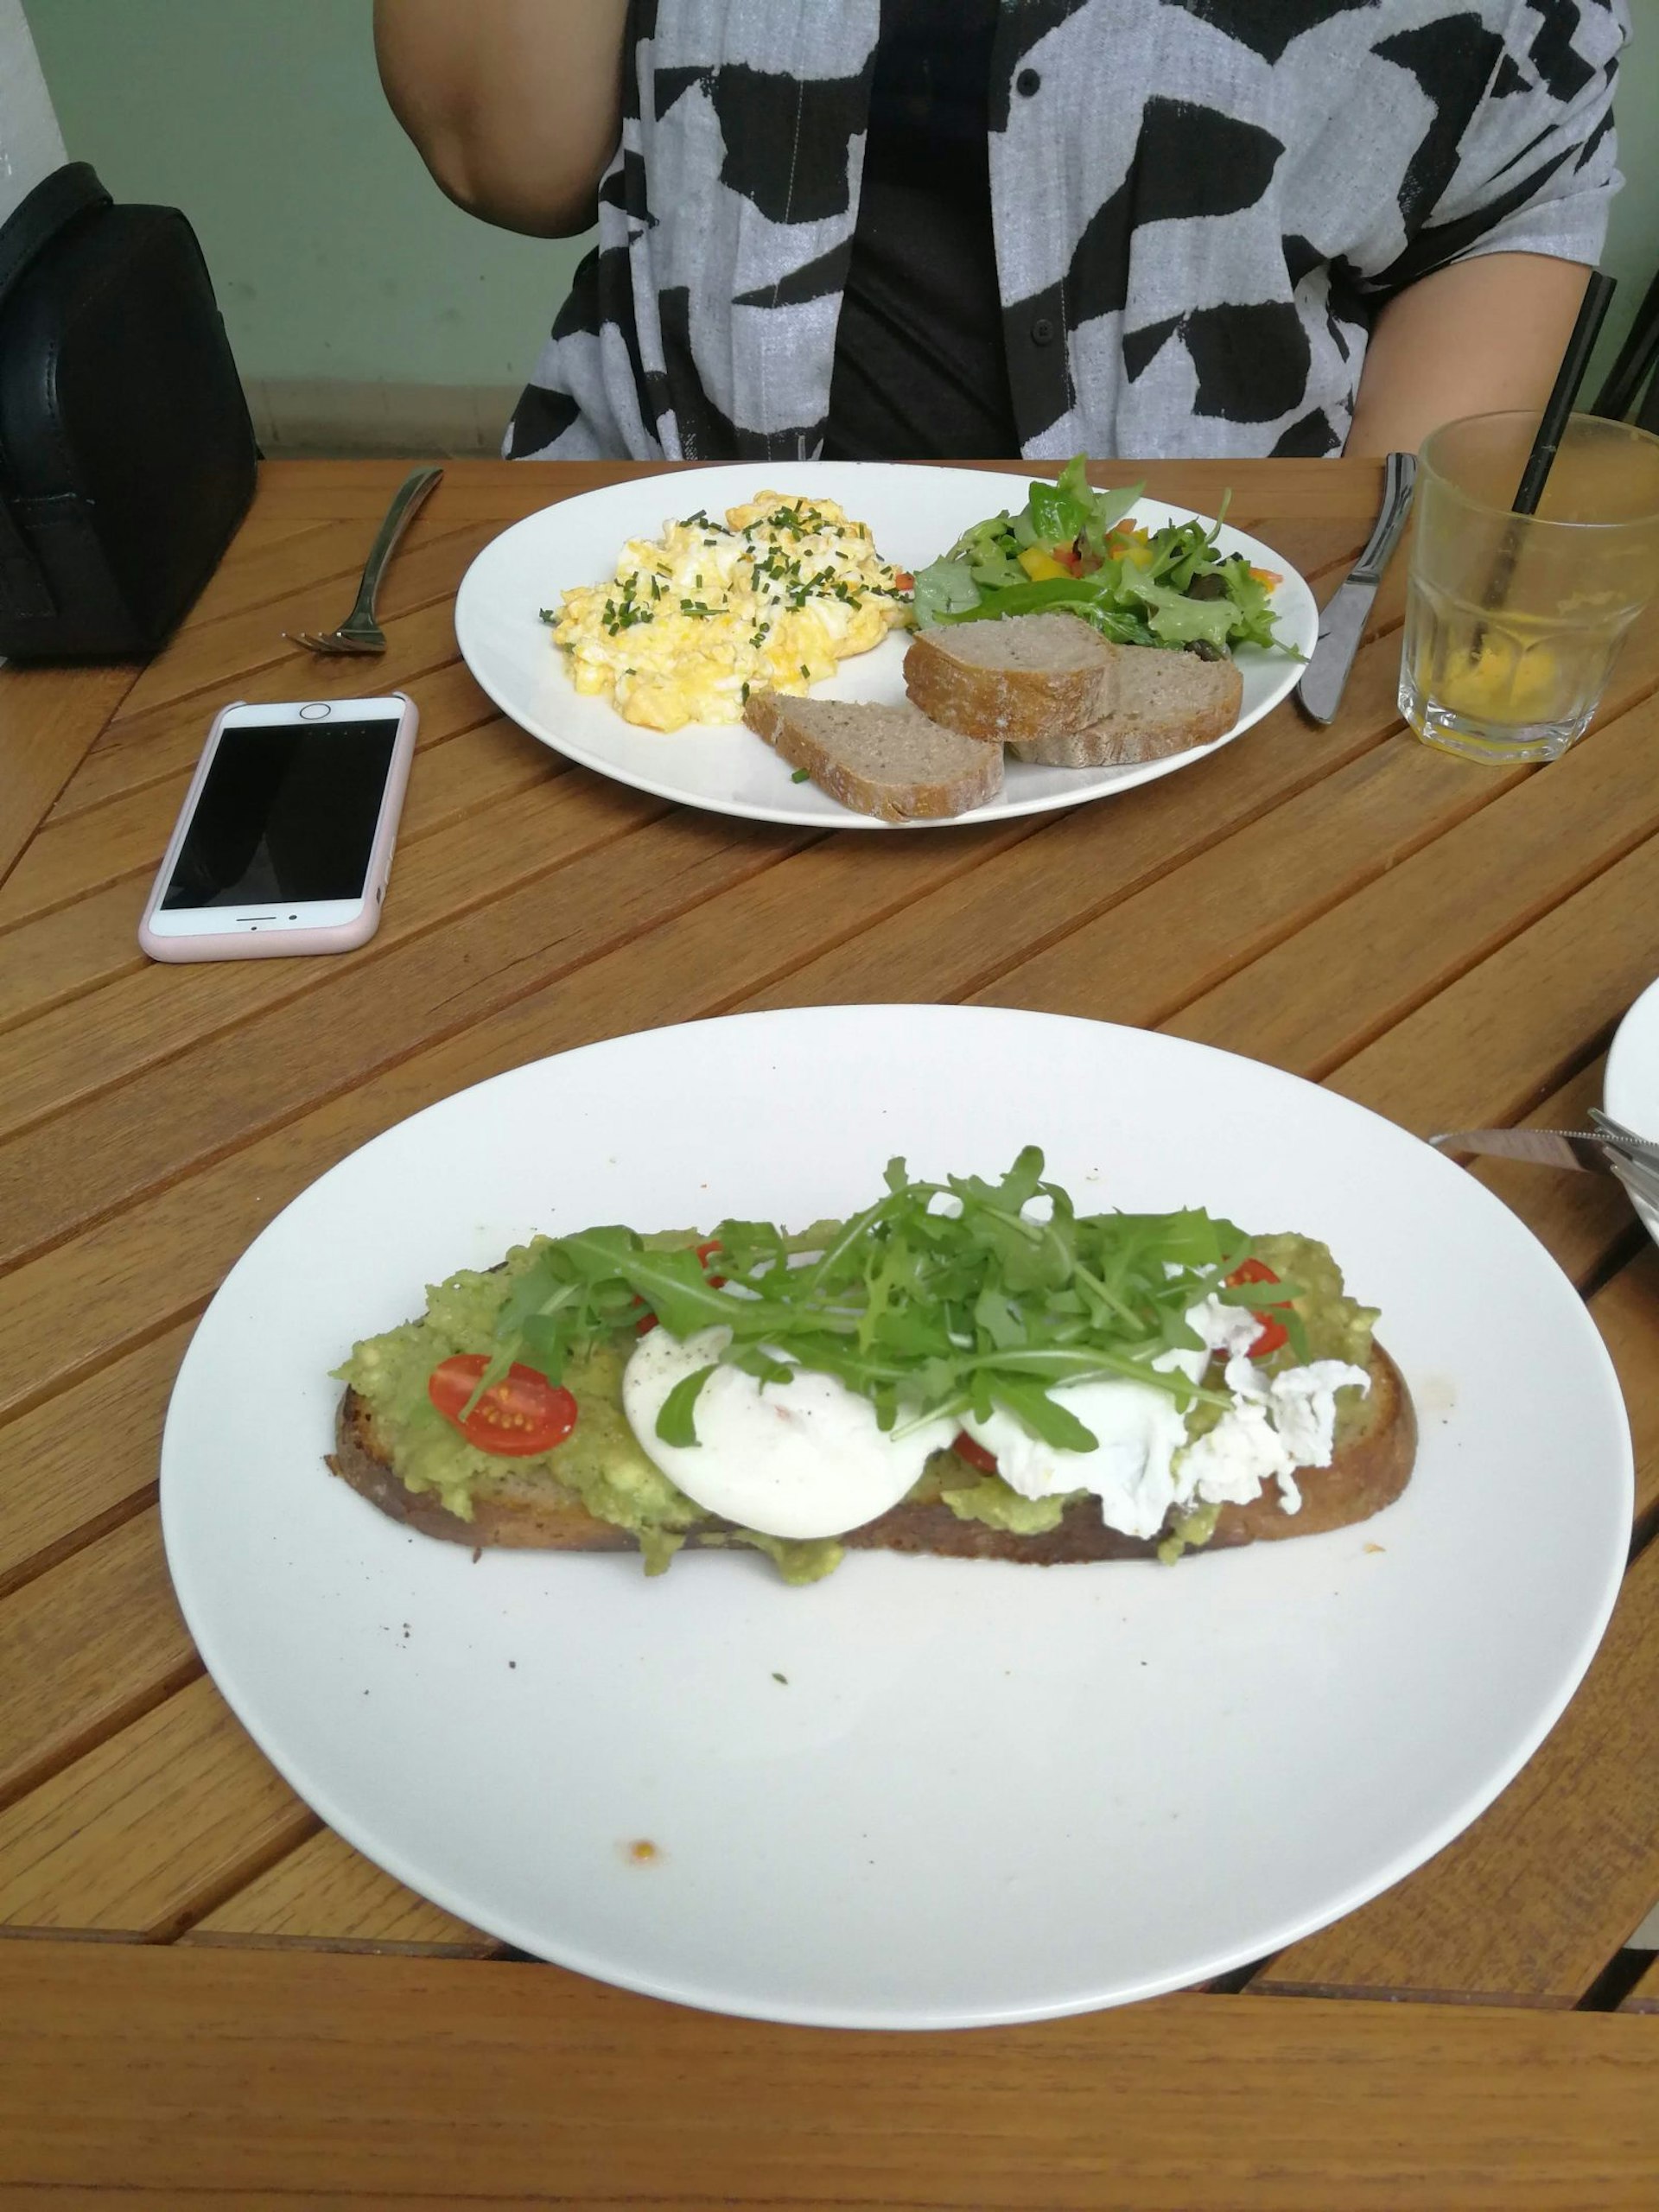 Two plates on a table: the one in the foreground has avocado and poached eggs on toast topped with rocket. The one in the background has scrambled eggs, bread and some salad.